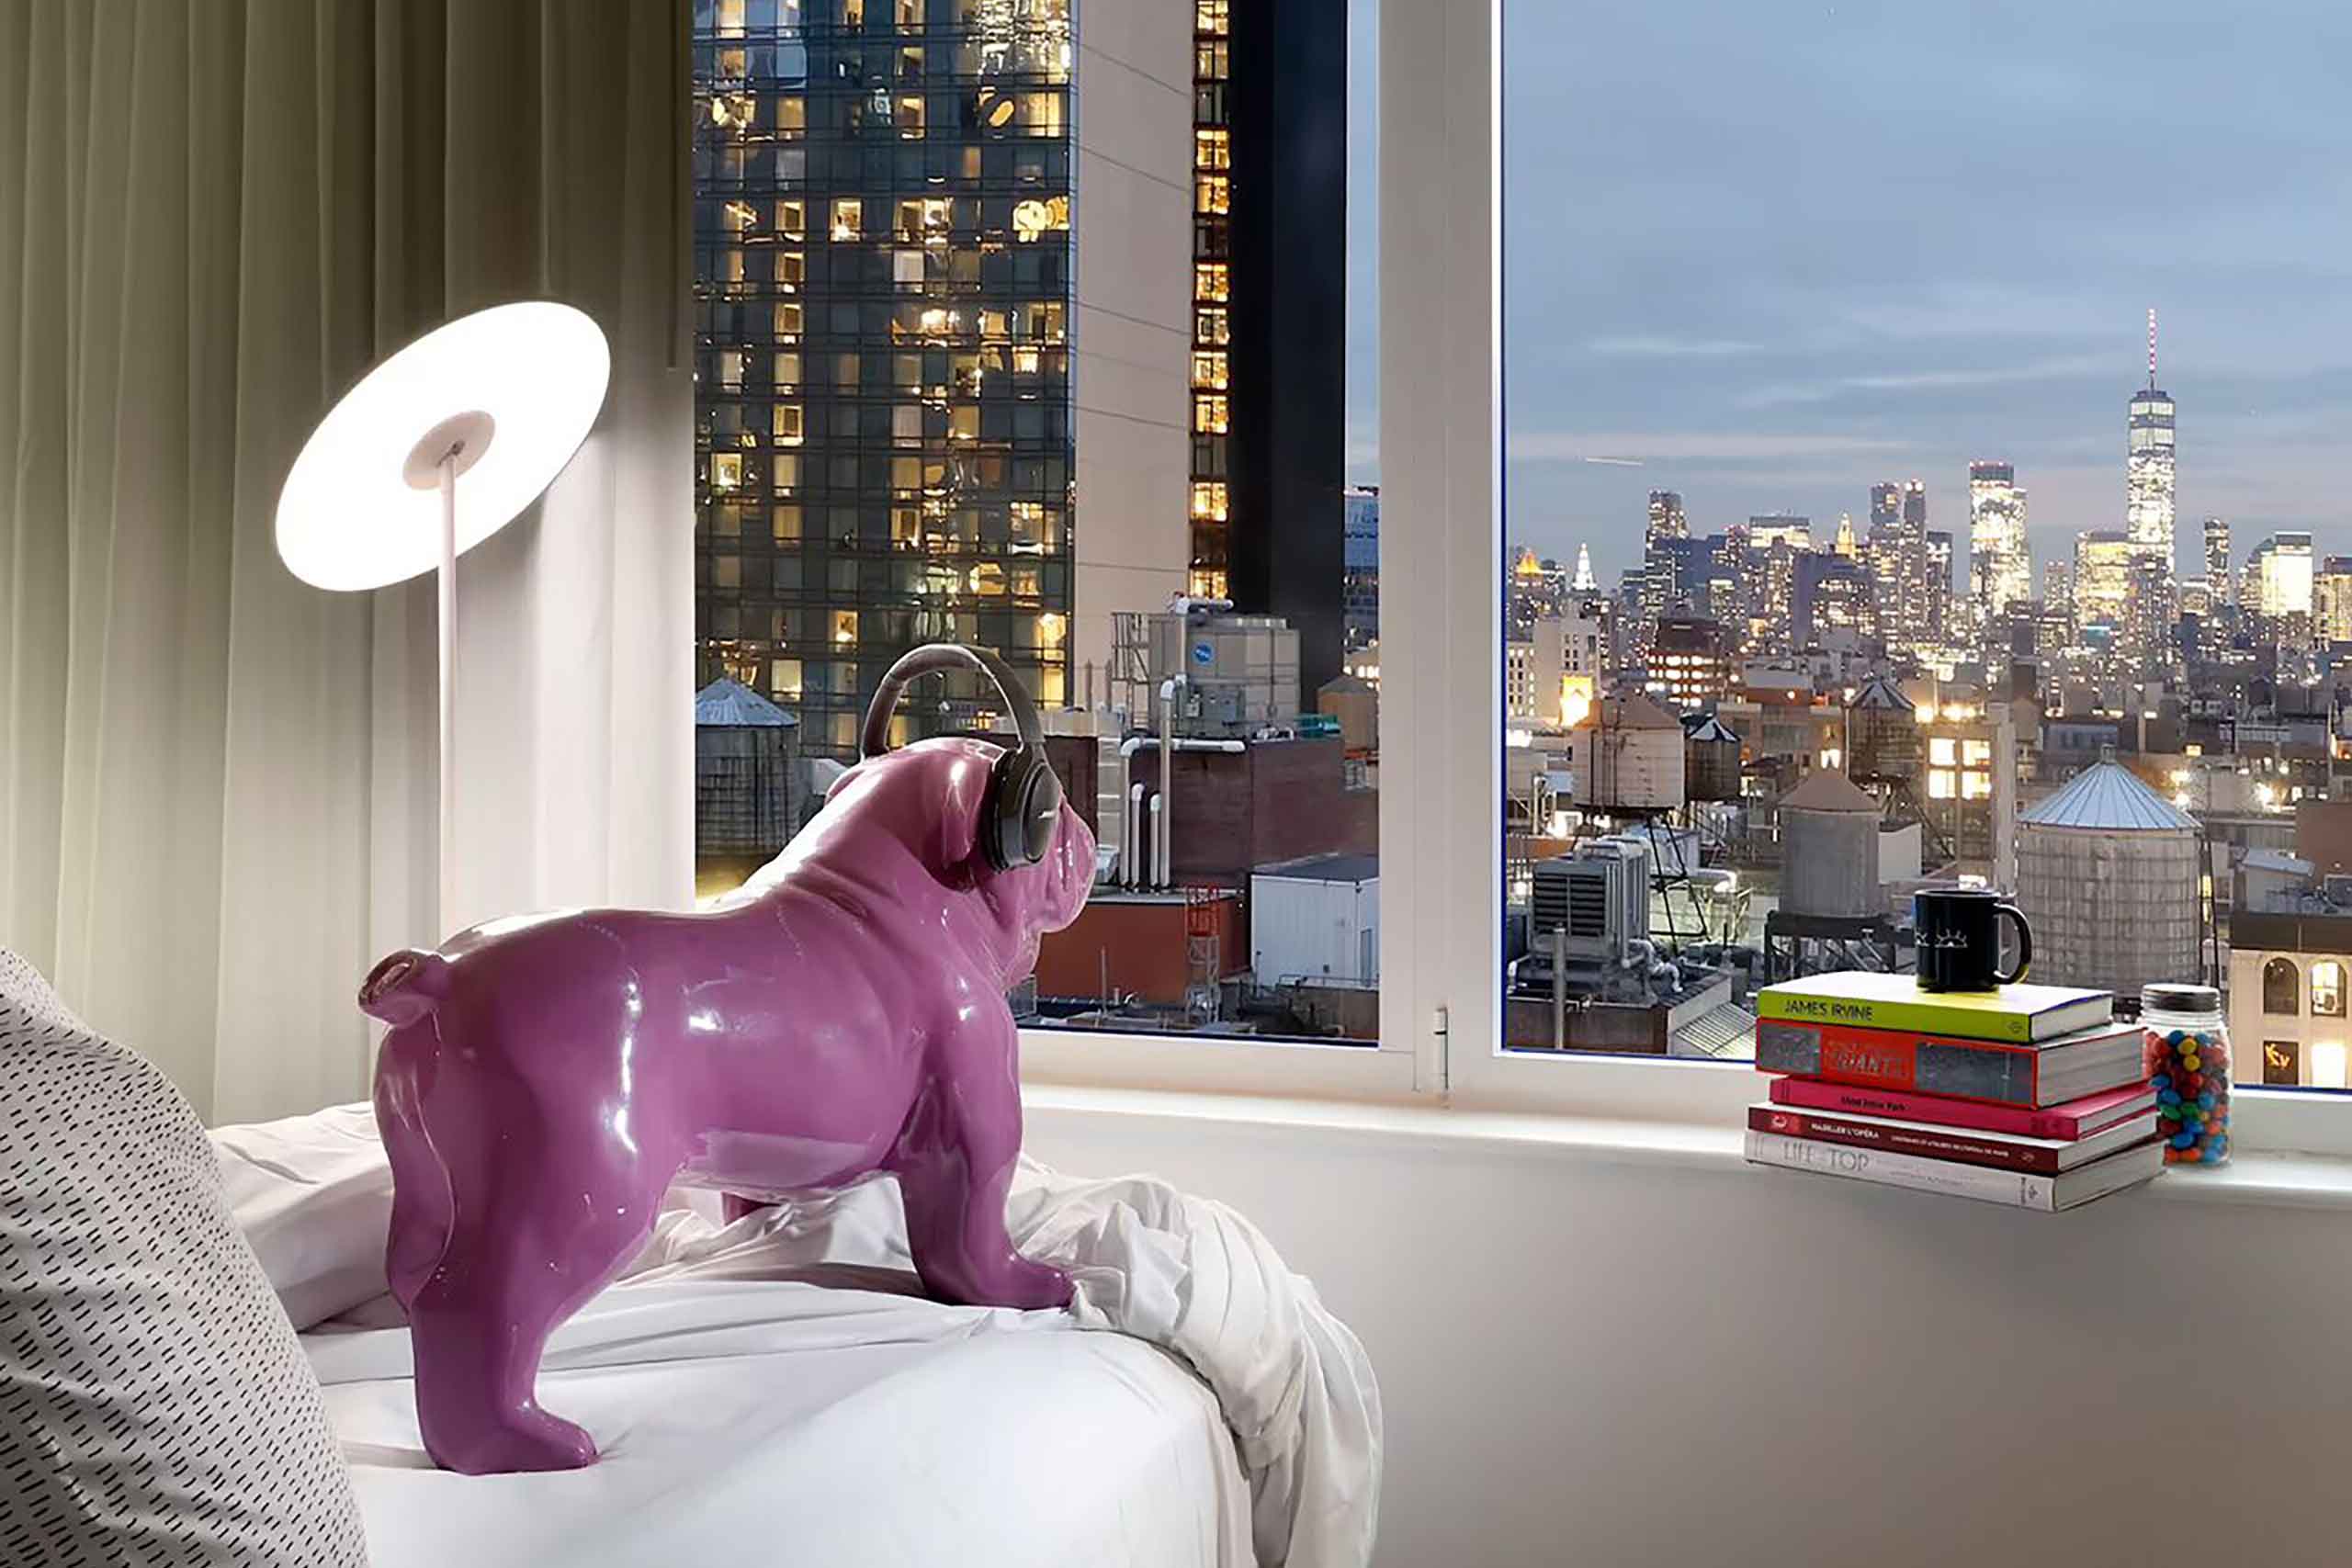 INNSiDE by Melia New York NoMad view from room, purple dog statue